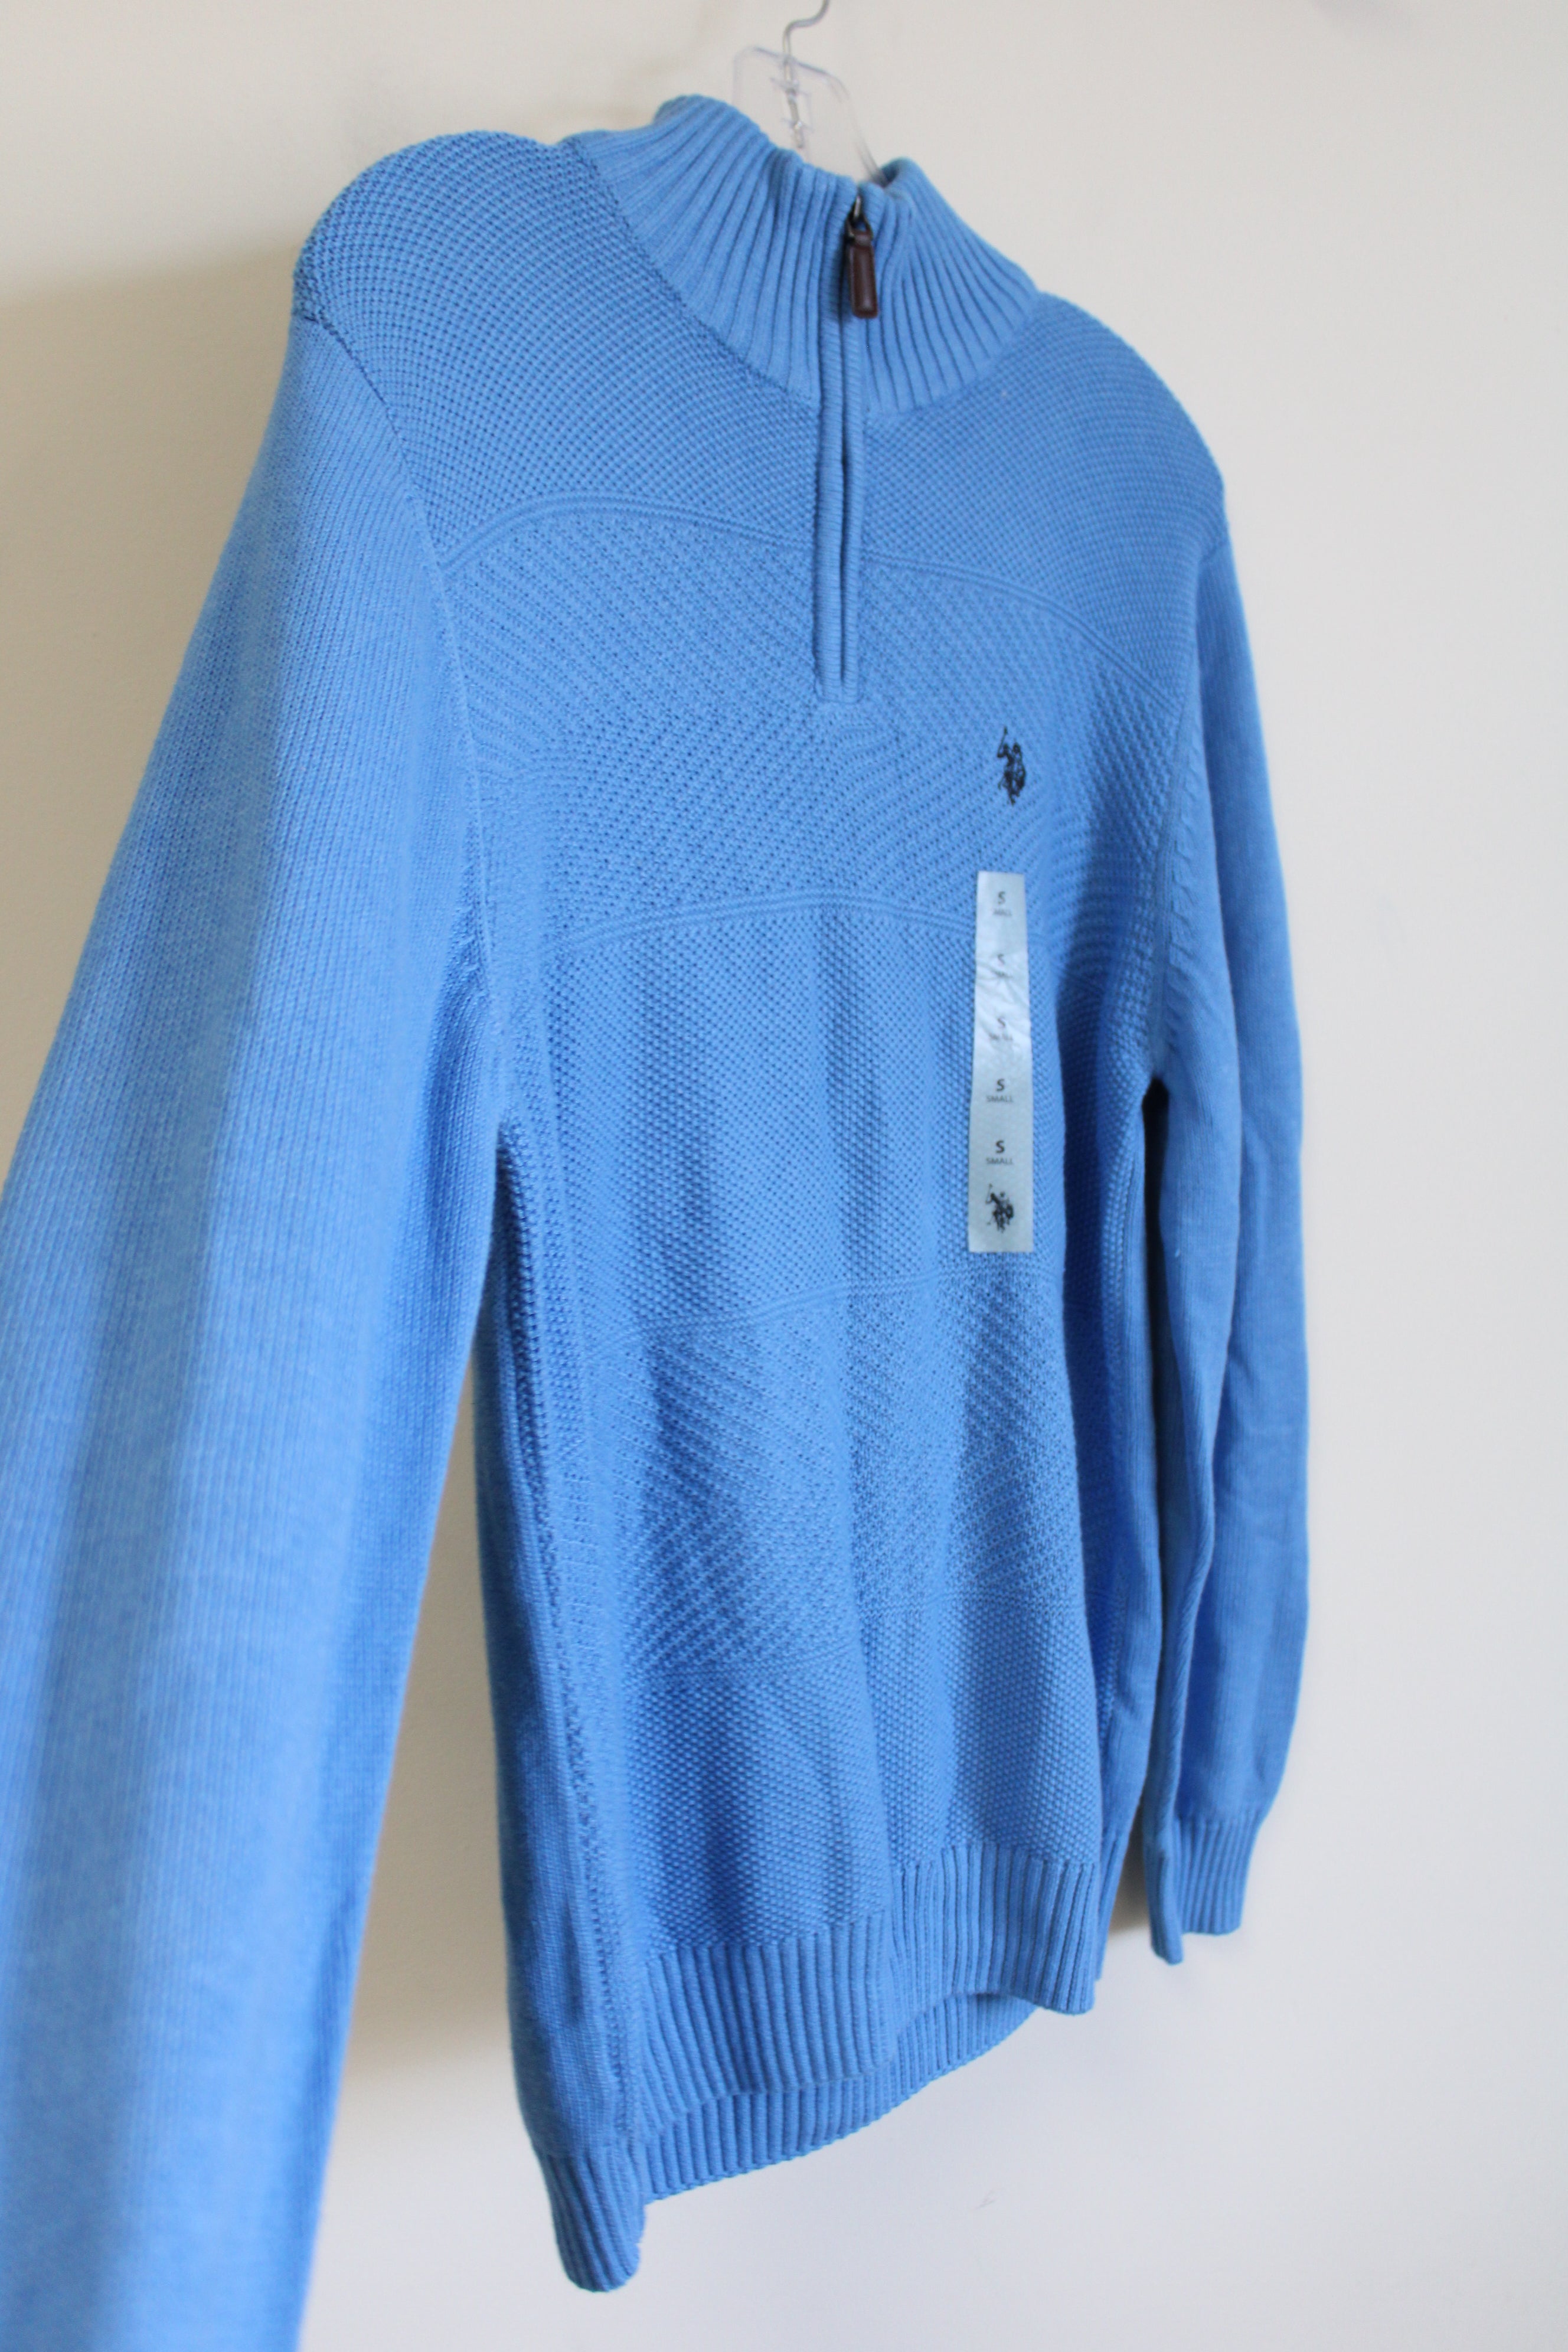 NEW U.S. Polo Assn. Blue Knit 1/4 Zip Pullover Sweater | S